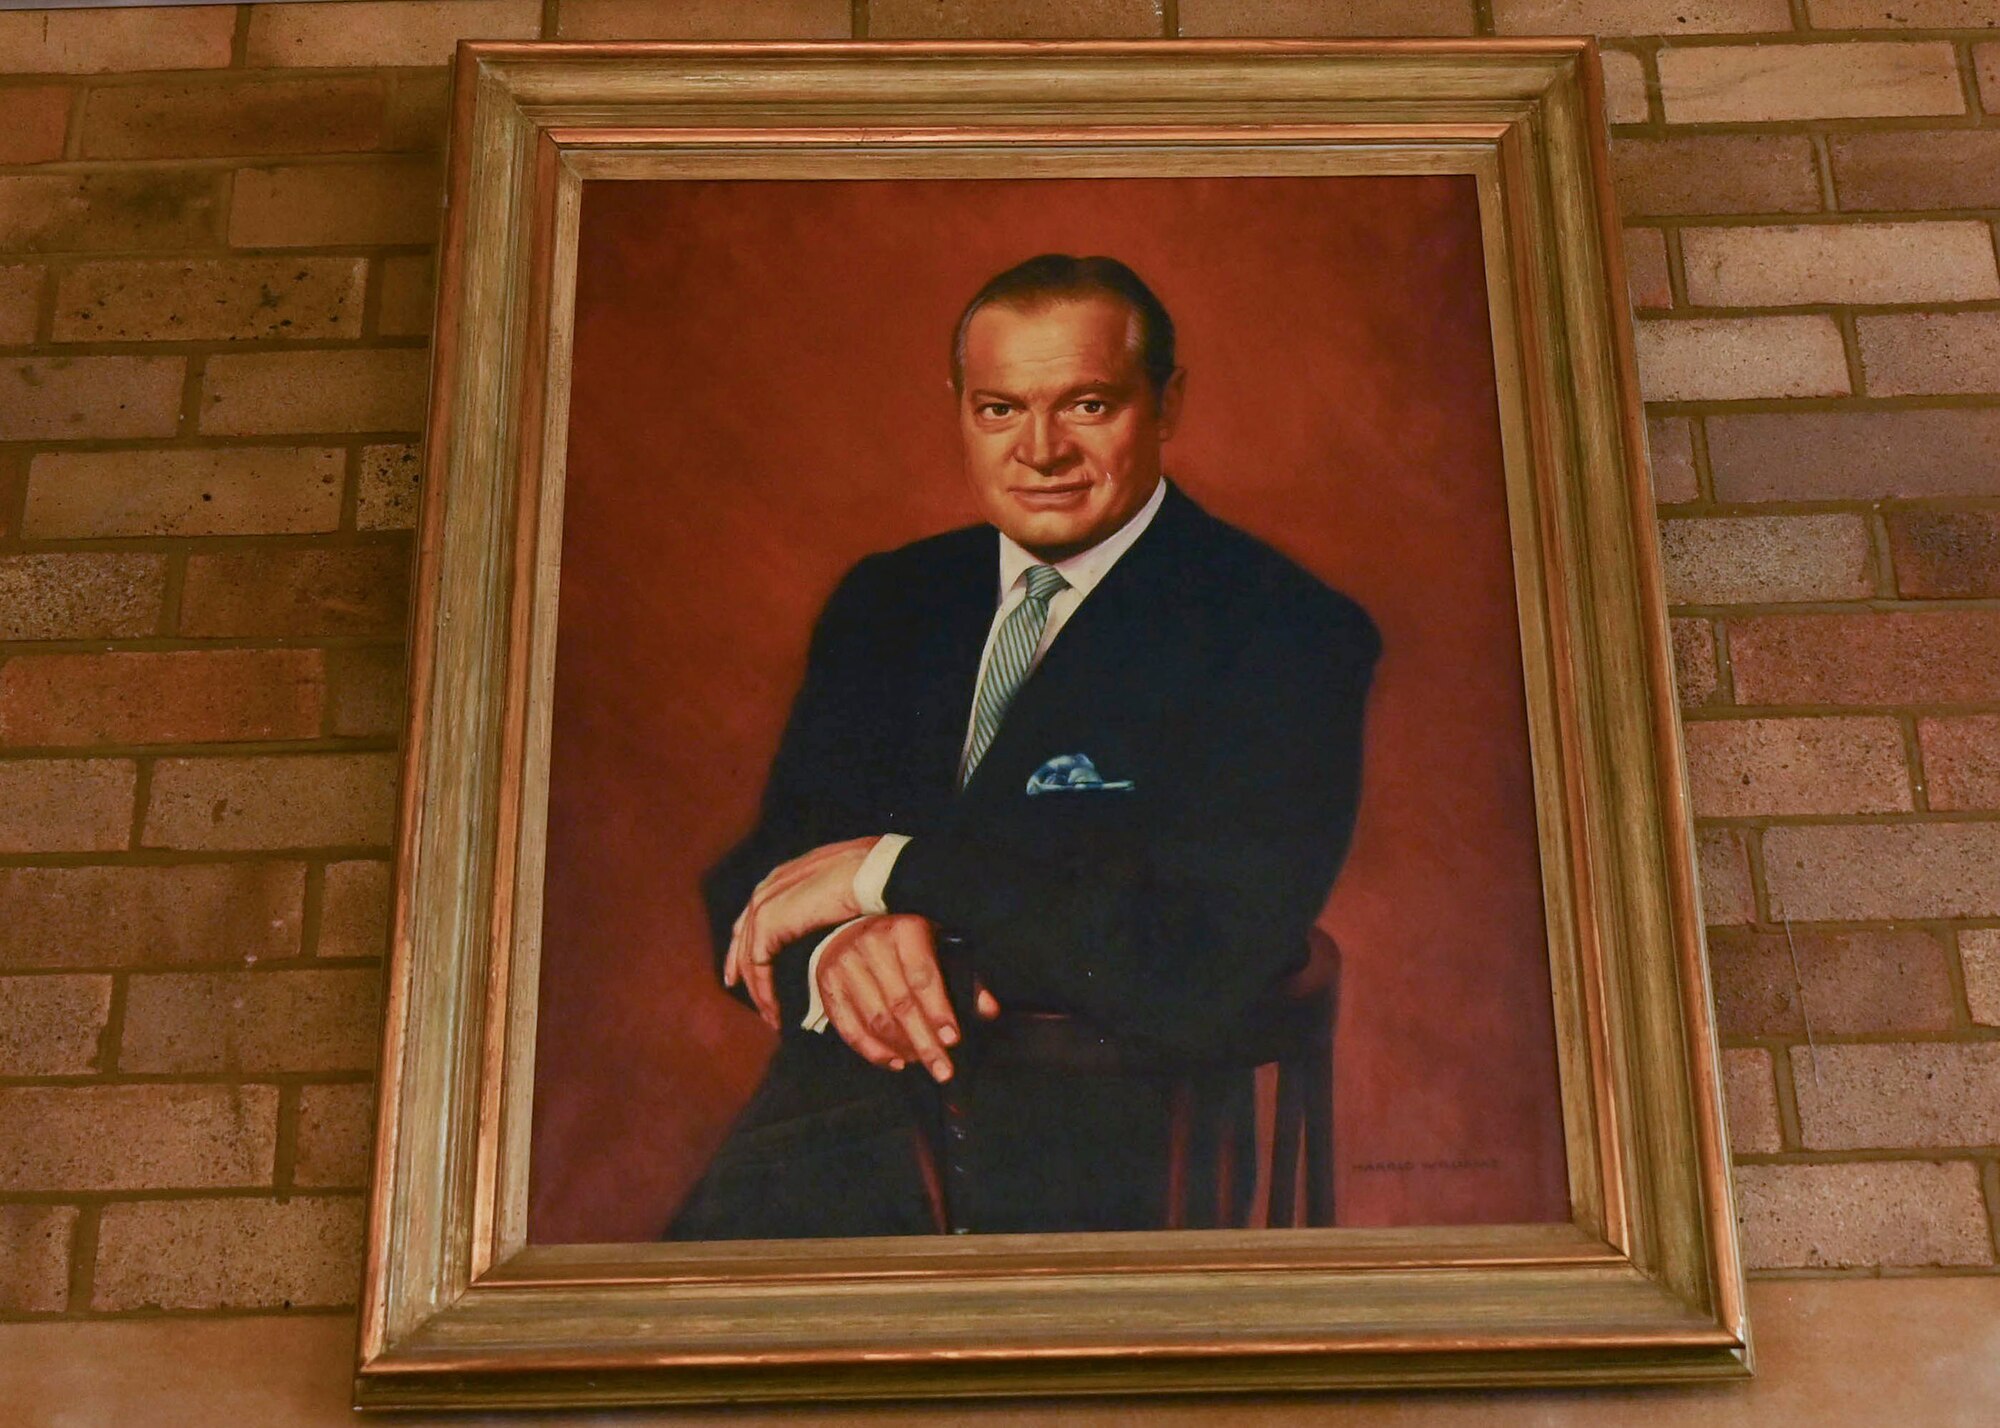 The portrait of Bob Hope was painted by Harold Williams, a local national, in 1970.